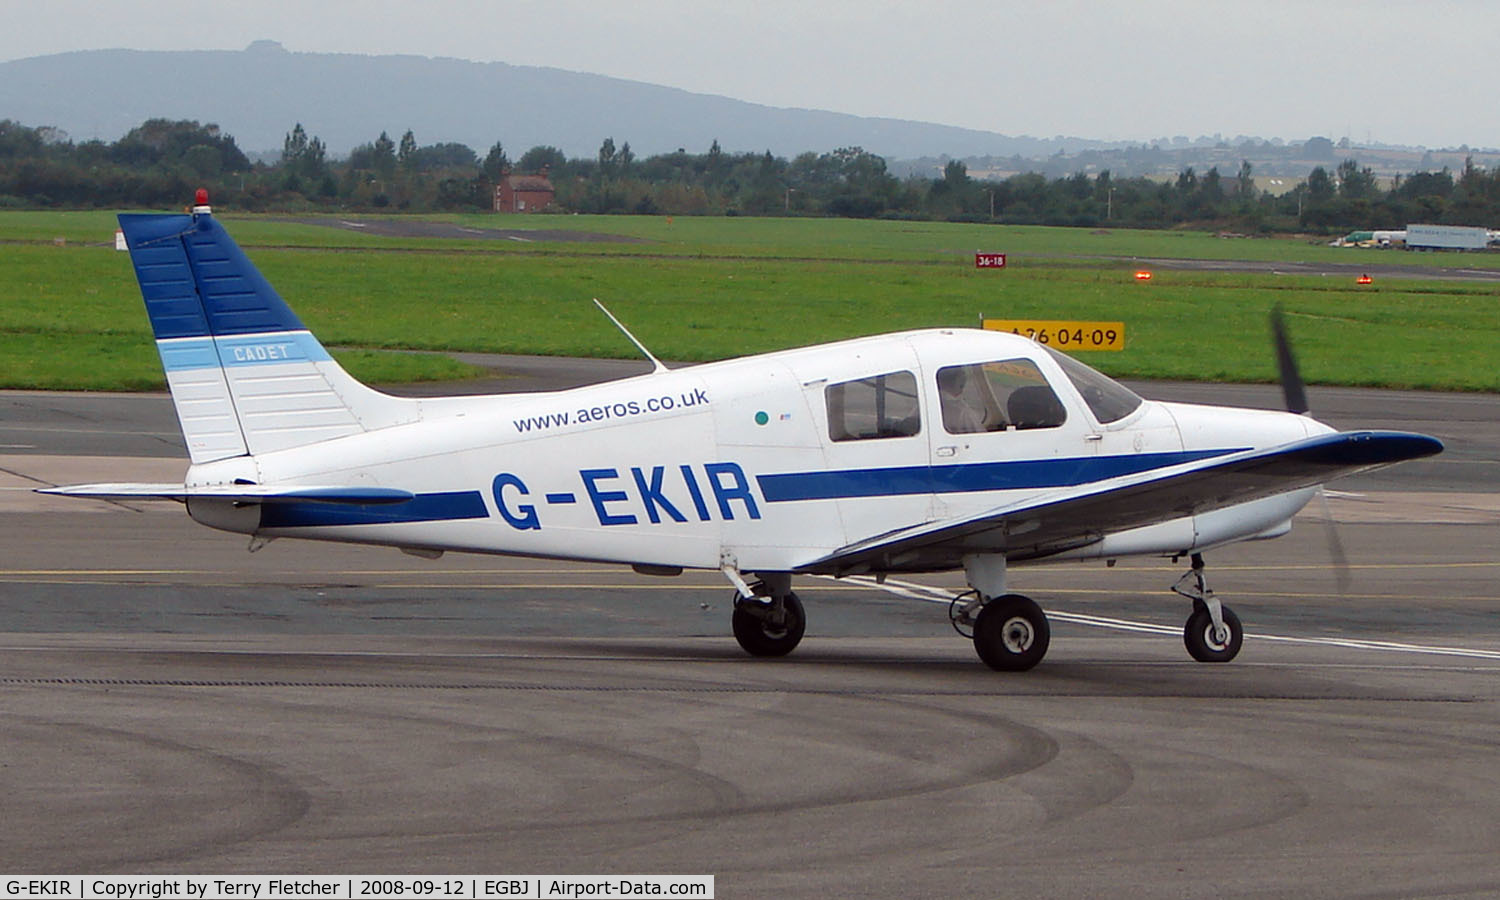 G-EKIR, 1989 Piper PA-28-161 Cadet C/N 28-41157, Pa-28-161 noted at Gloucestershire Airport  UK in Sept 2008